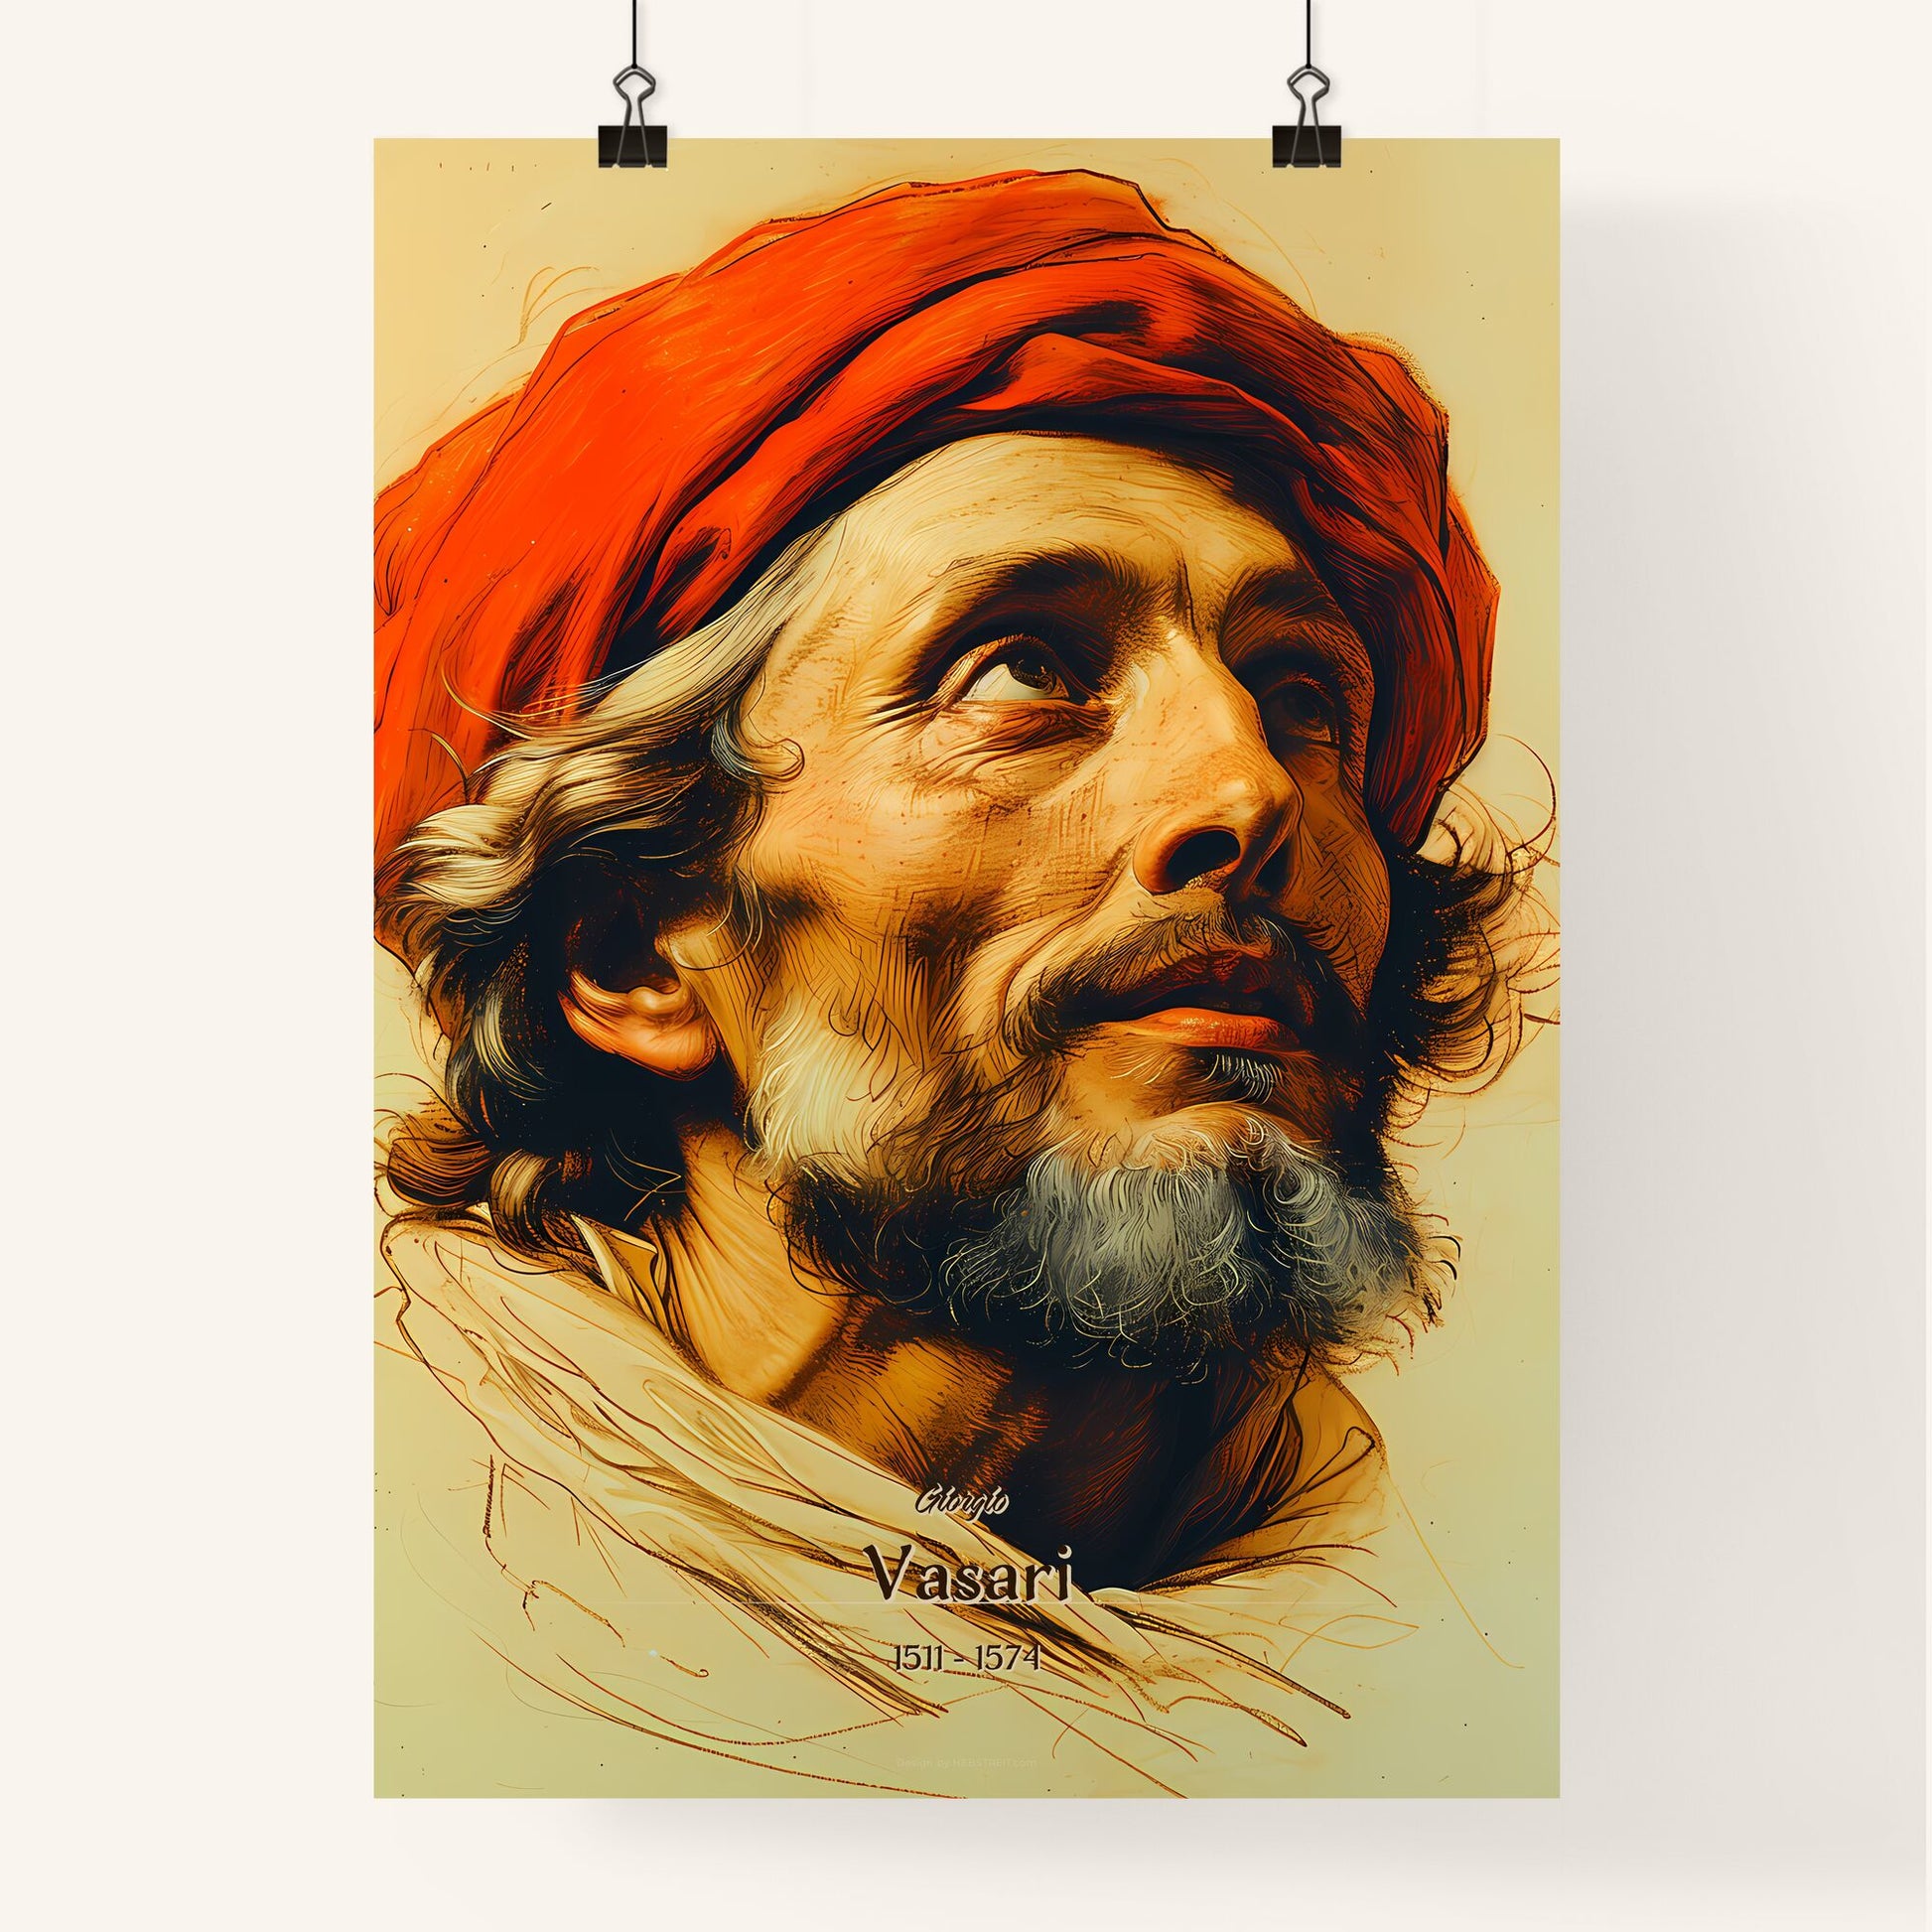 Giorgio, Vasari, 1511 - 1574, A Poster of a painting of a man with a red headdress Default Title